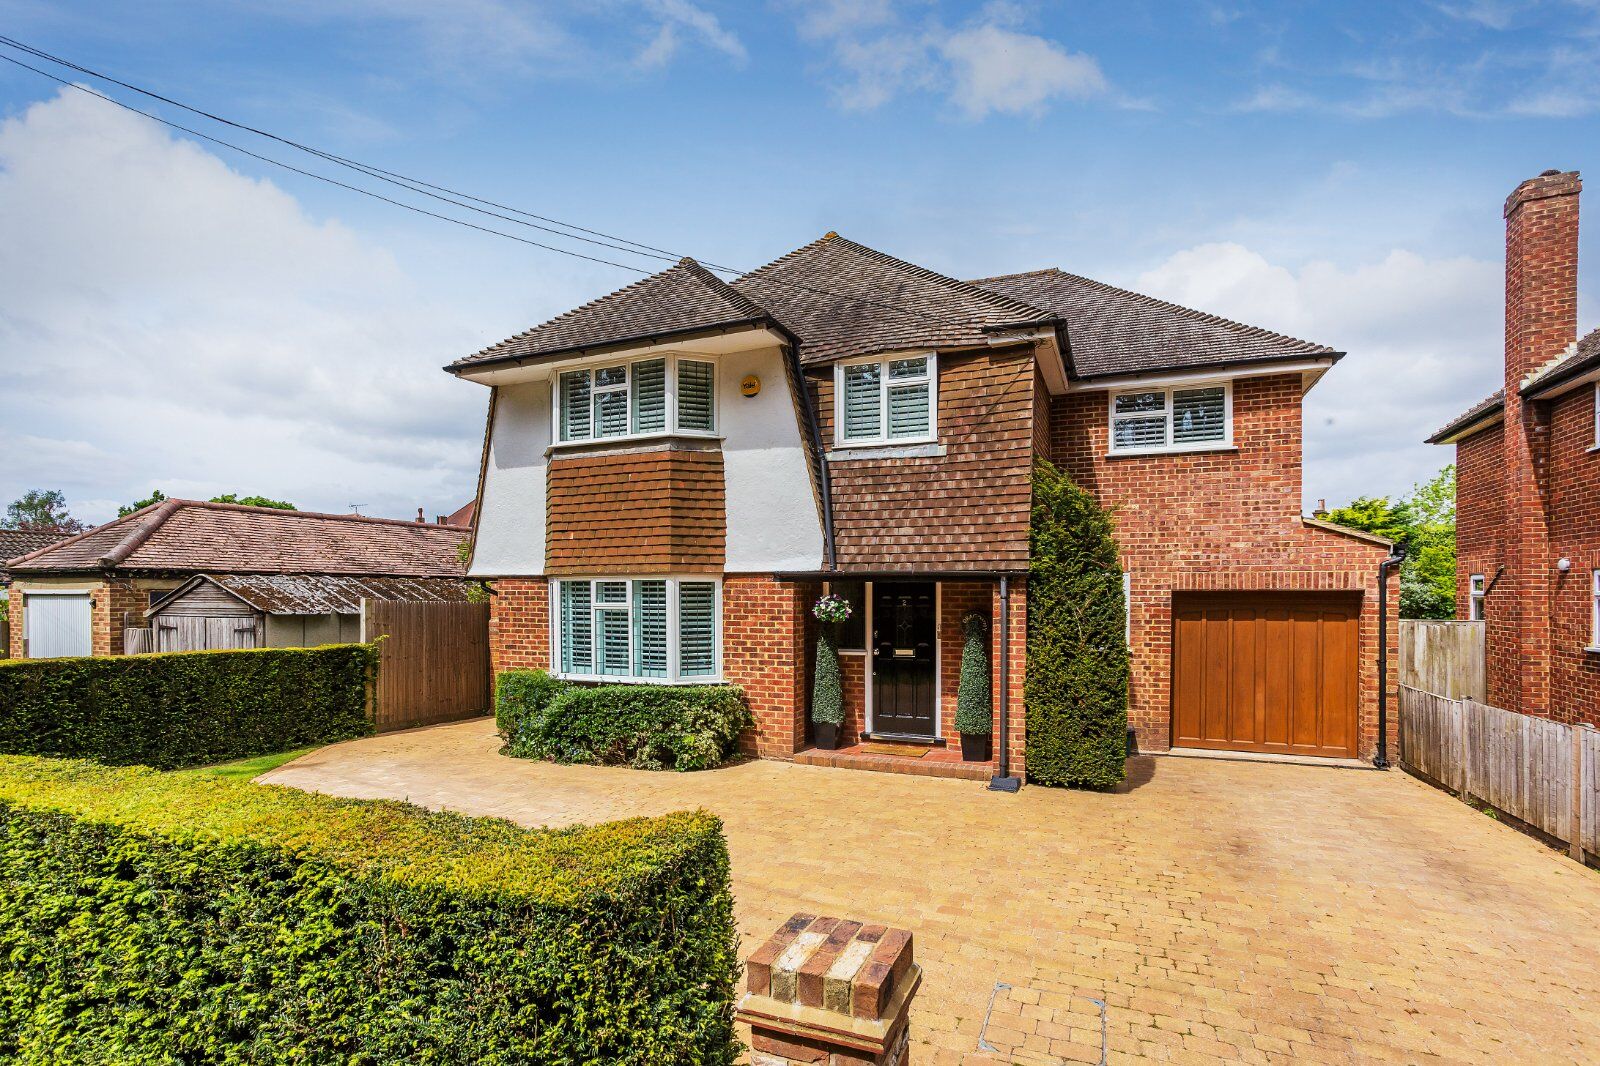 4 bedroom detached house for sale The Bridle Path, Ewell Epsom, KT17, main image